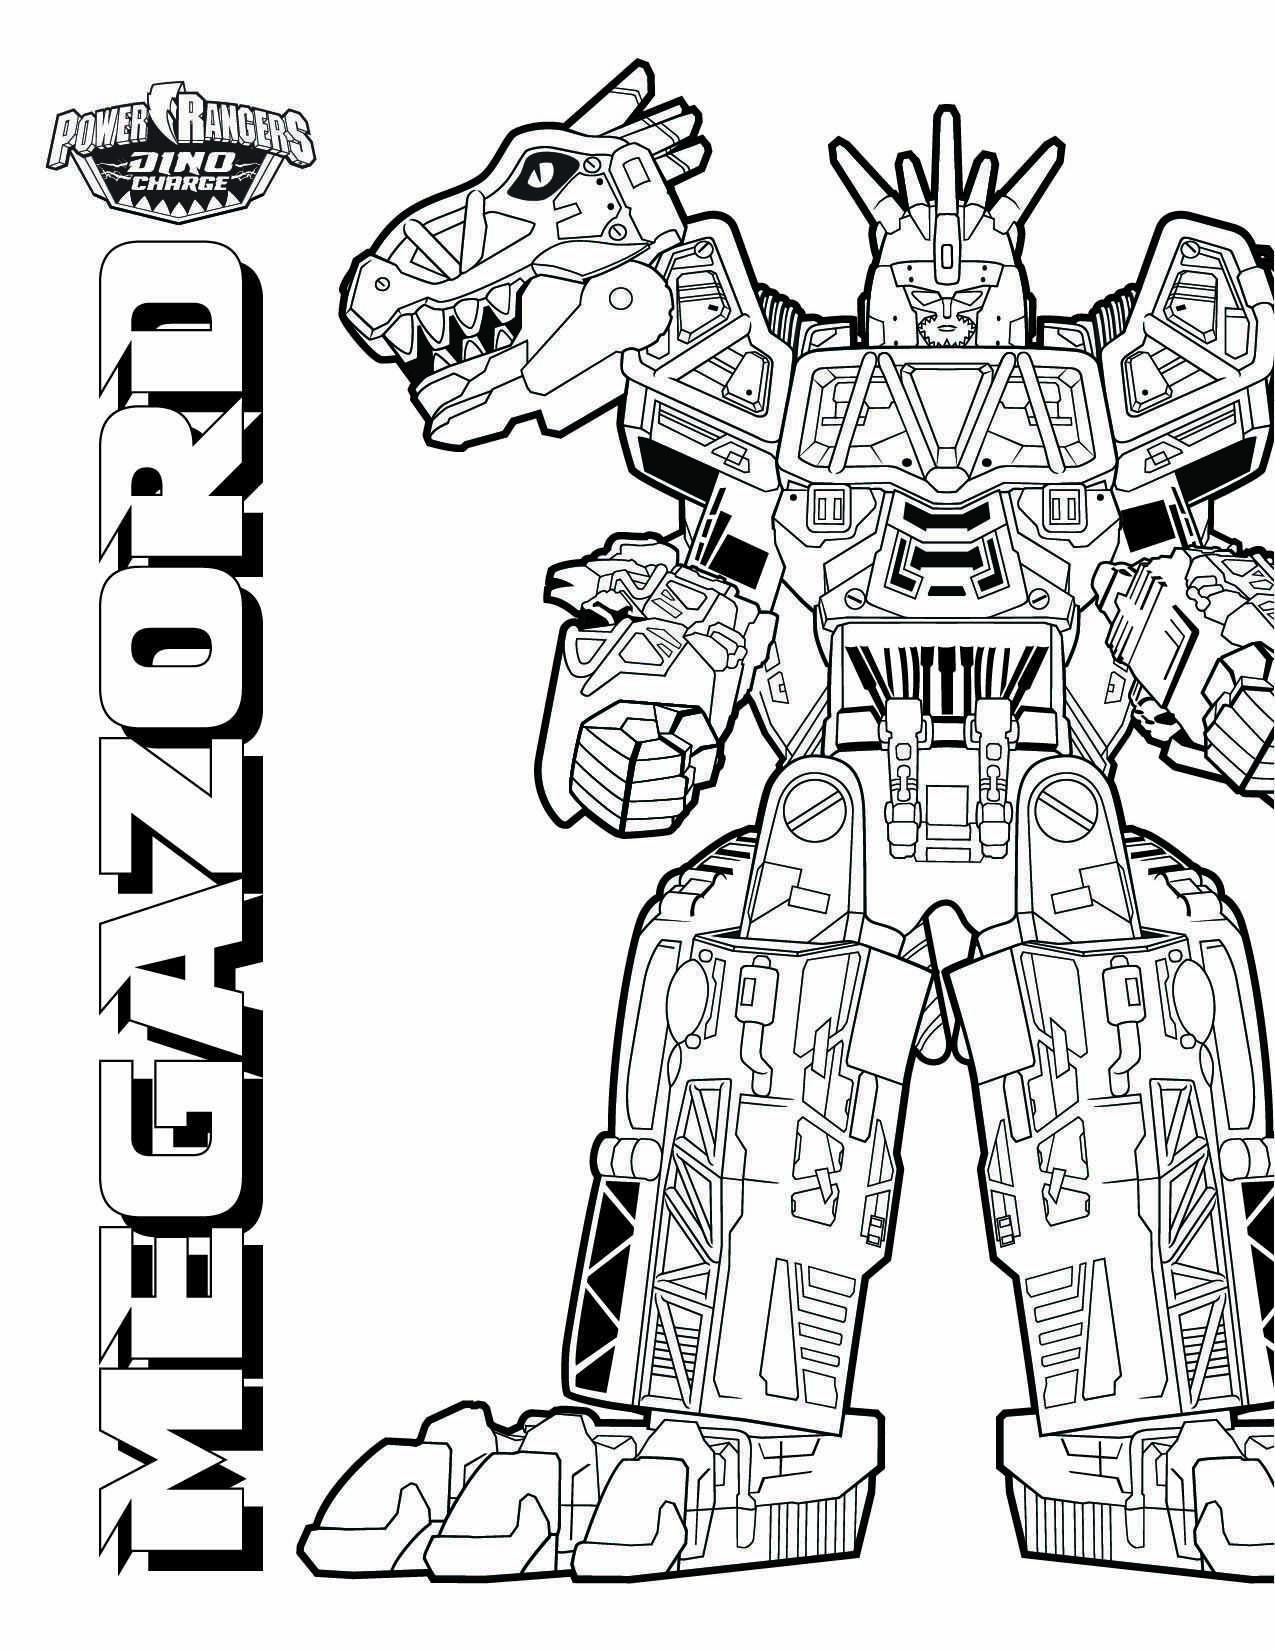 Megazord Download Them All Http Www Powerrangers Com Download Type Coloring Pages Pow